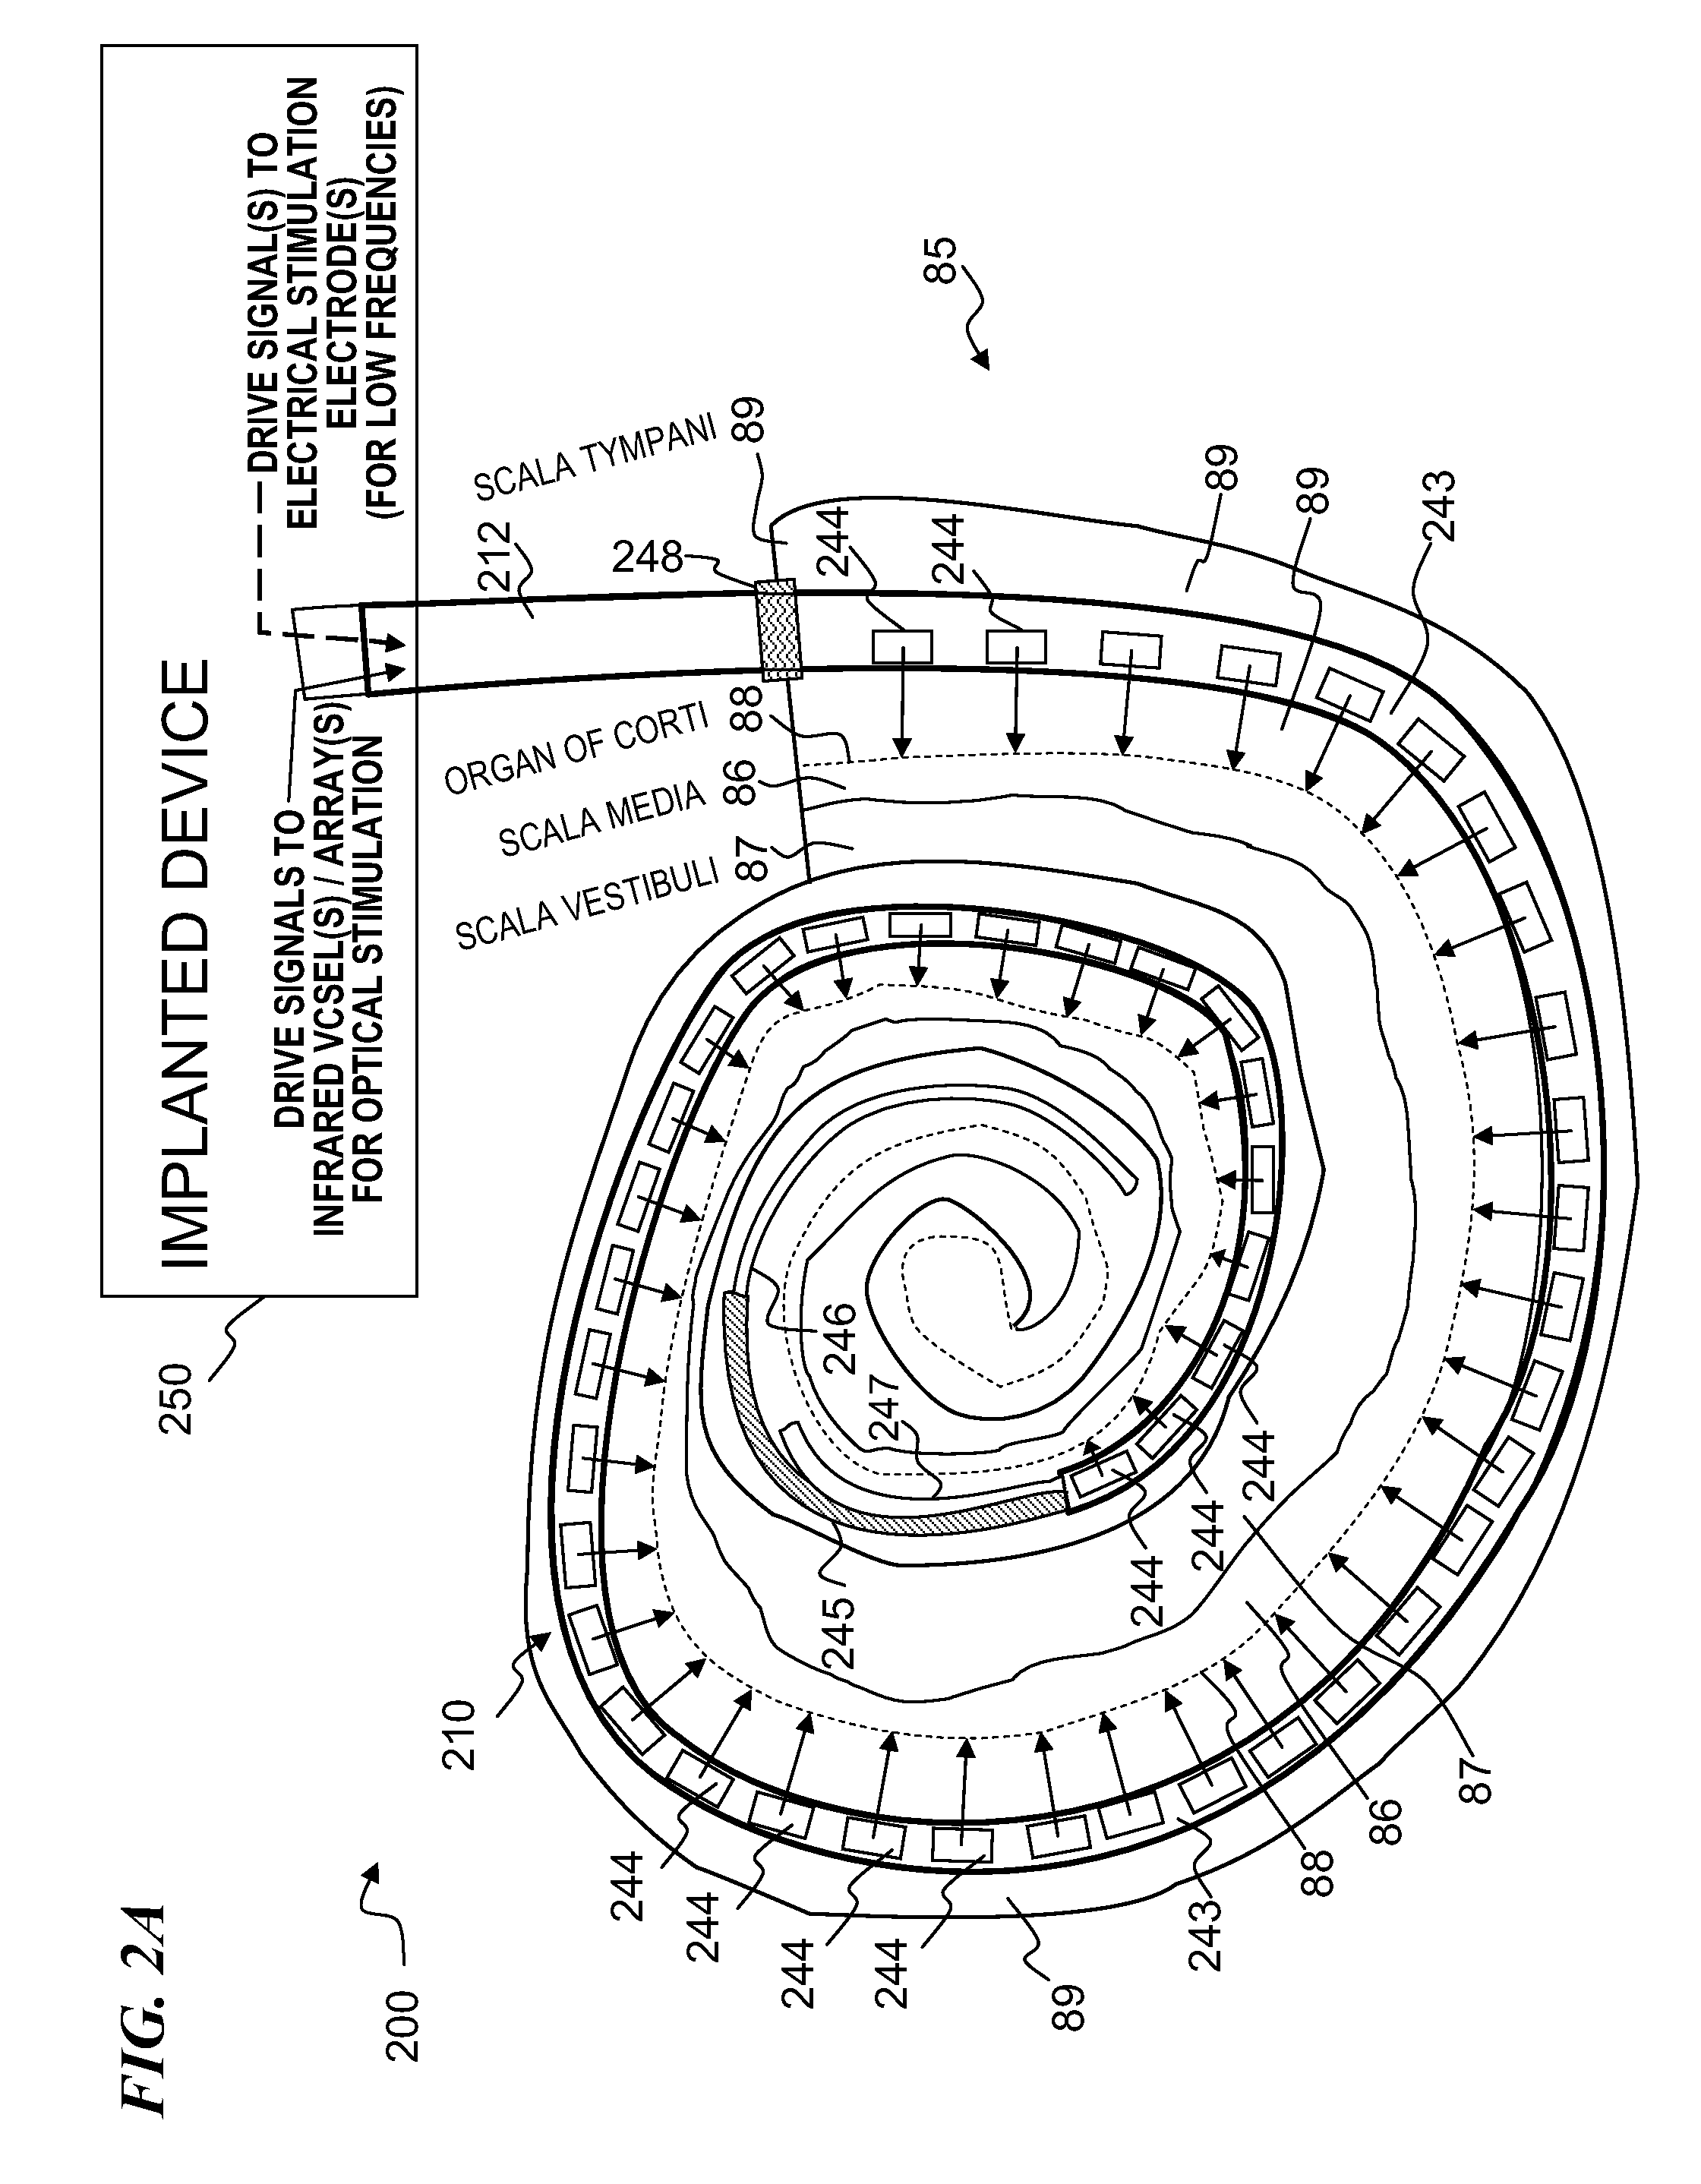 Cochlear implant using optical stimulation with encoded information designed to limit heating effects